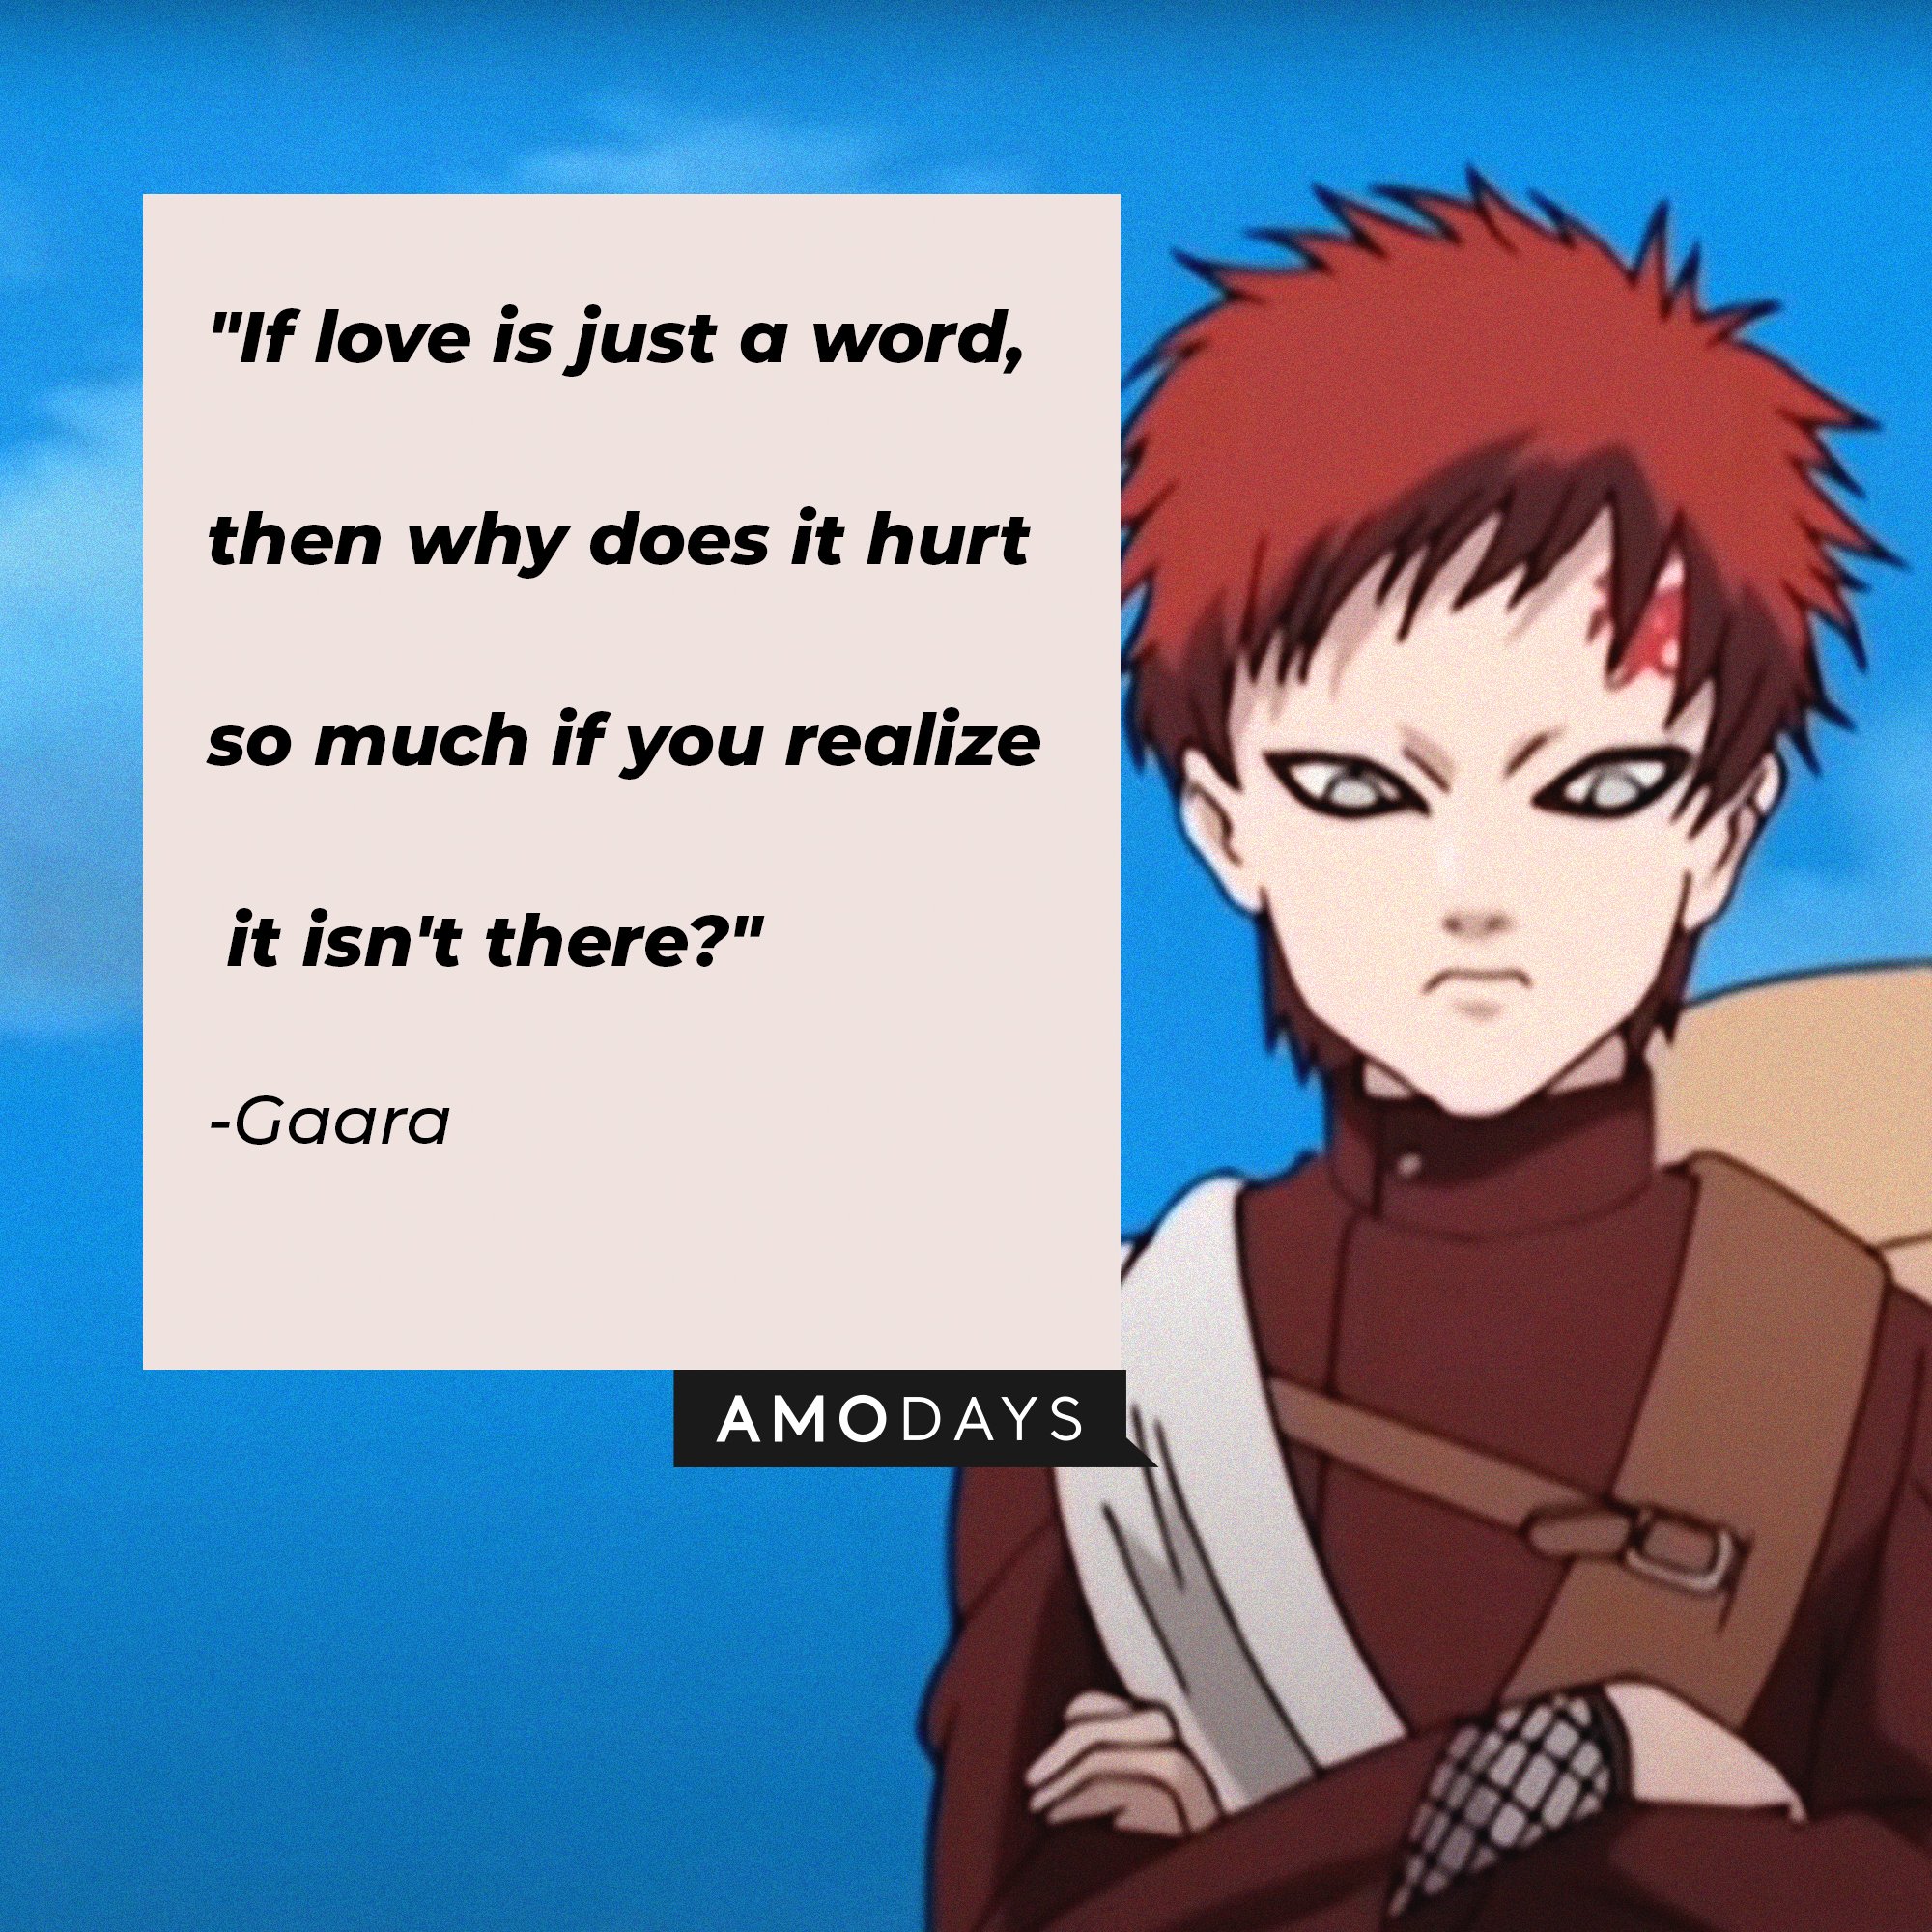 Gaara’s quote: "If love is just a word, then why does it hurt so much if you realize it isn't there?" | Image: AmoDays